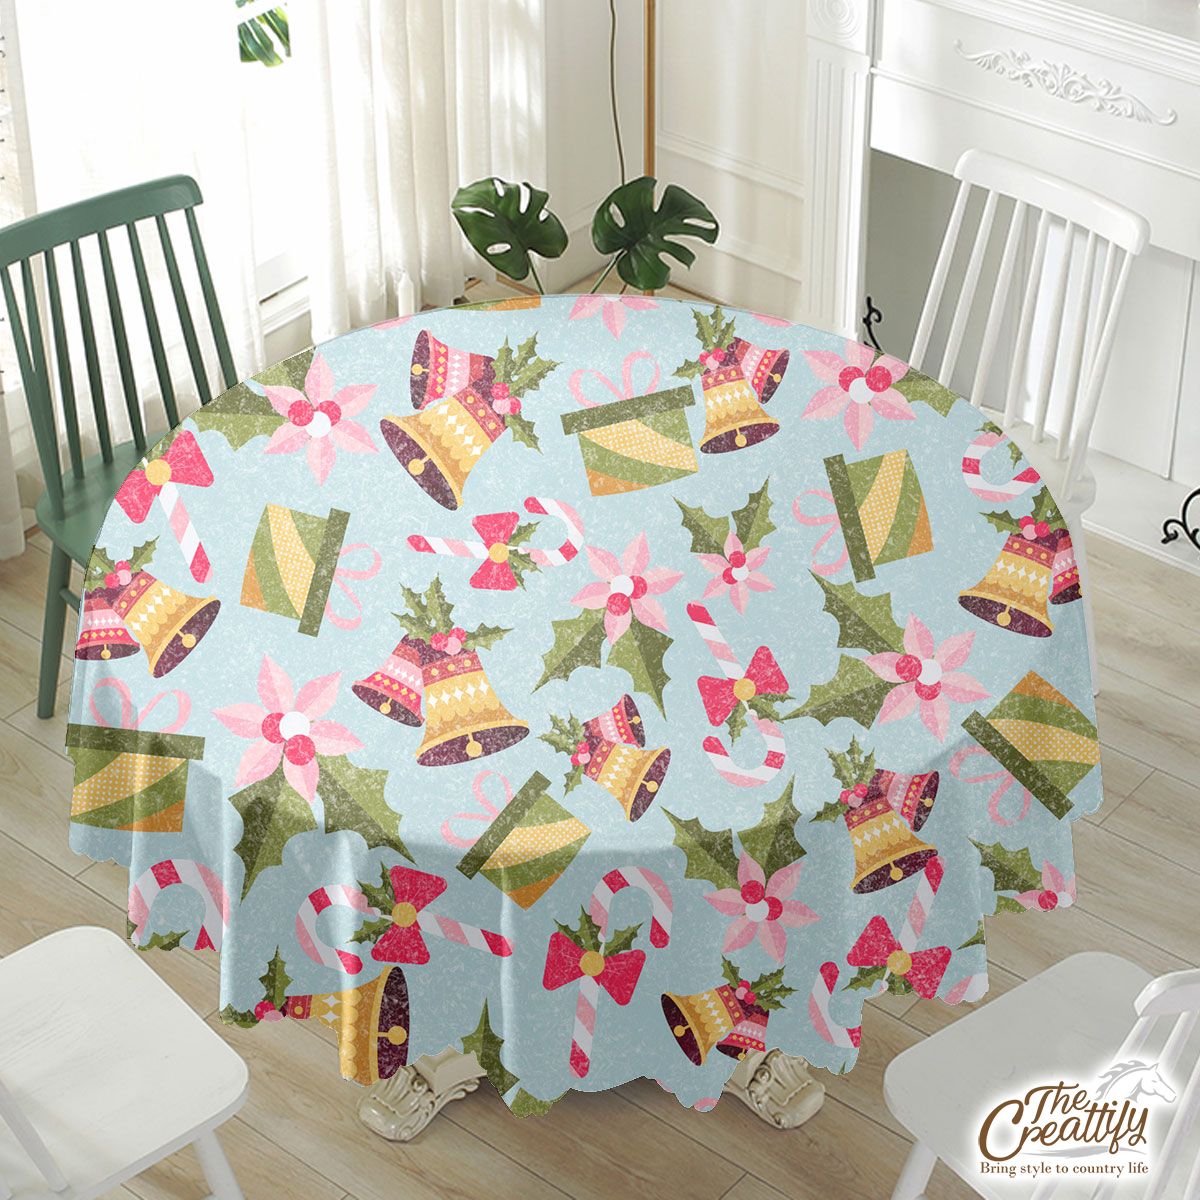 Bells, Christmas Bell And Candy Canes With Christmas Gifts Waterproof Tablecloth